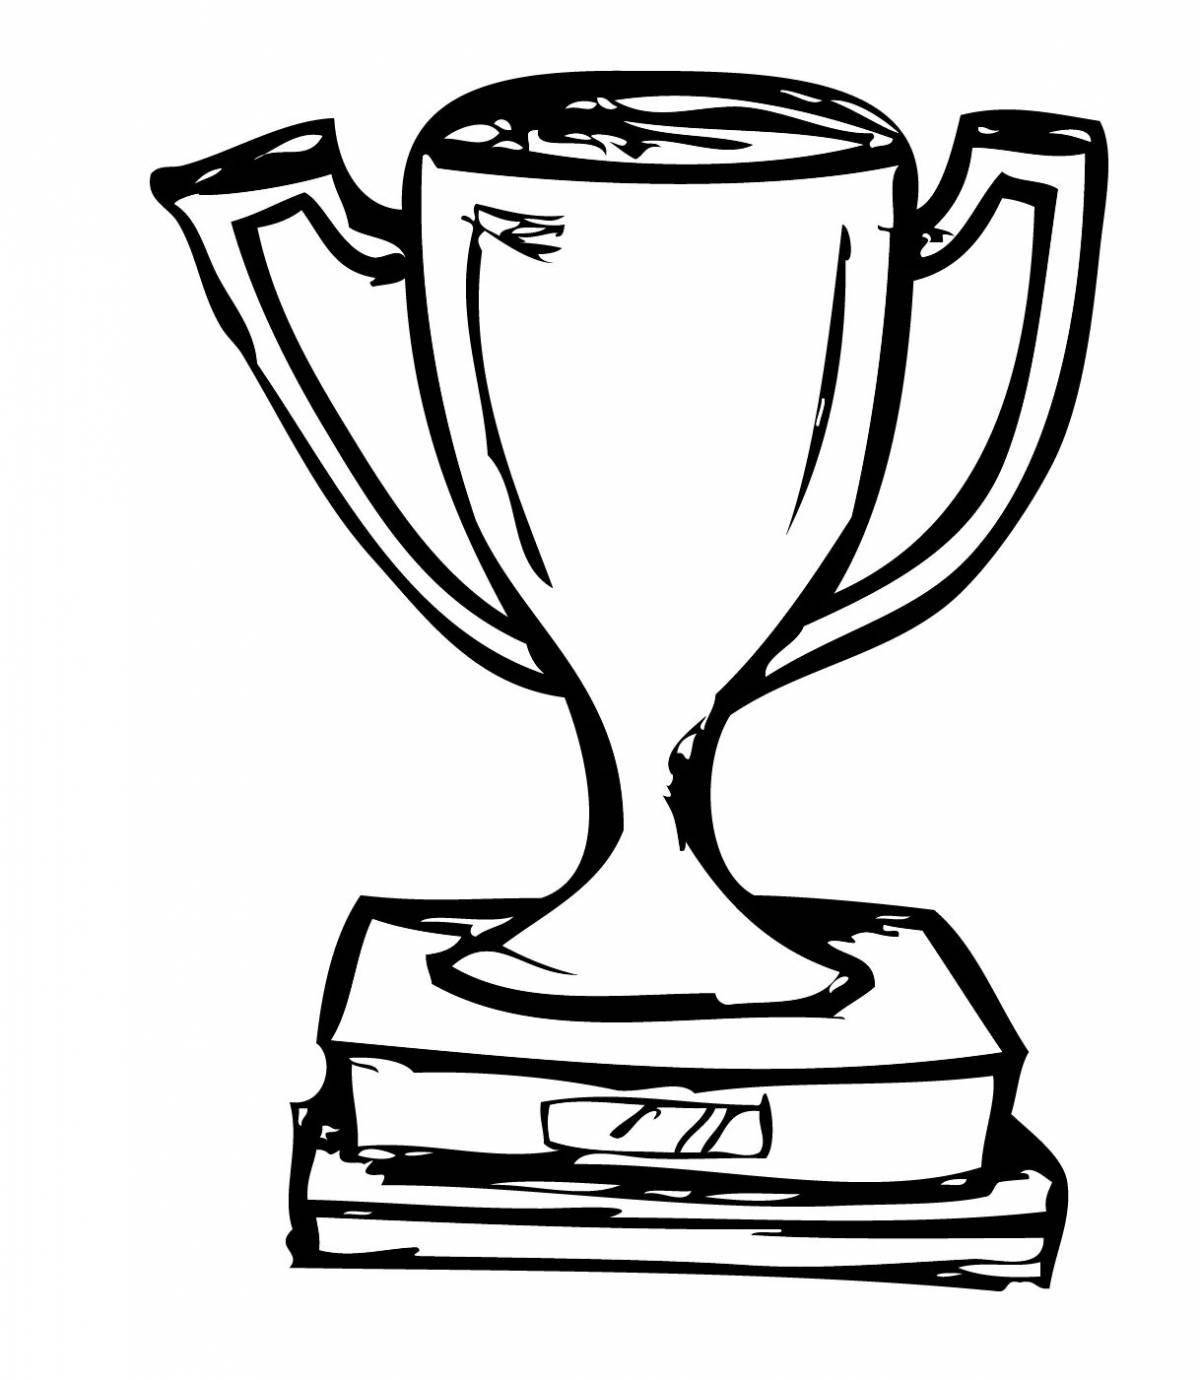 Coloring page dazzling football cup